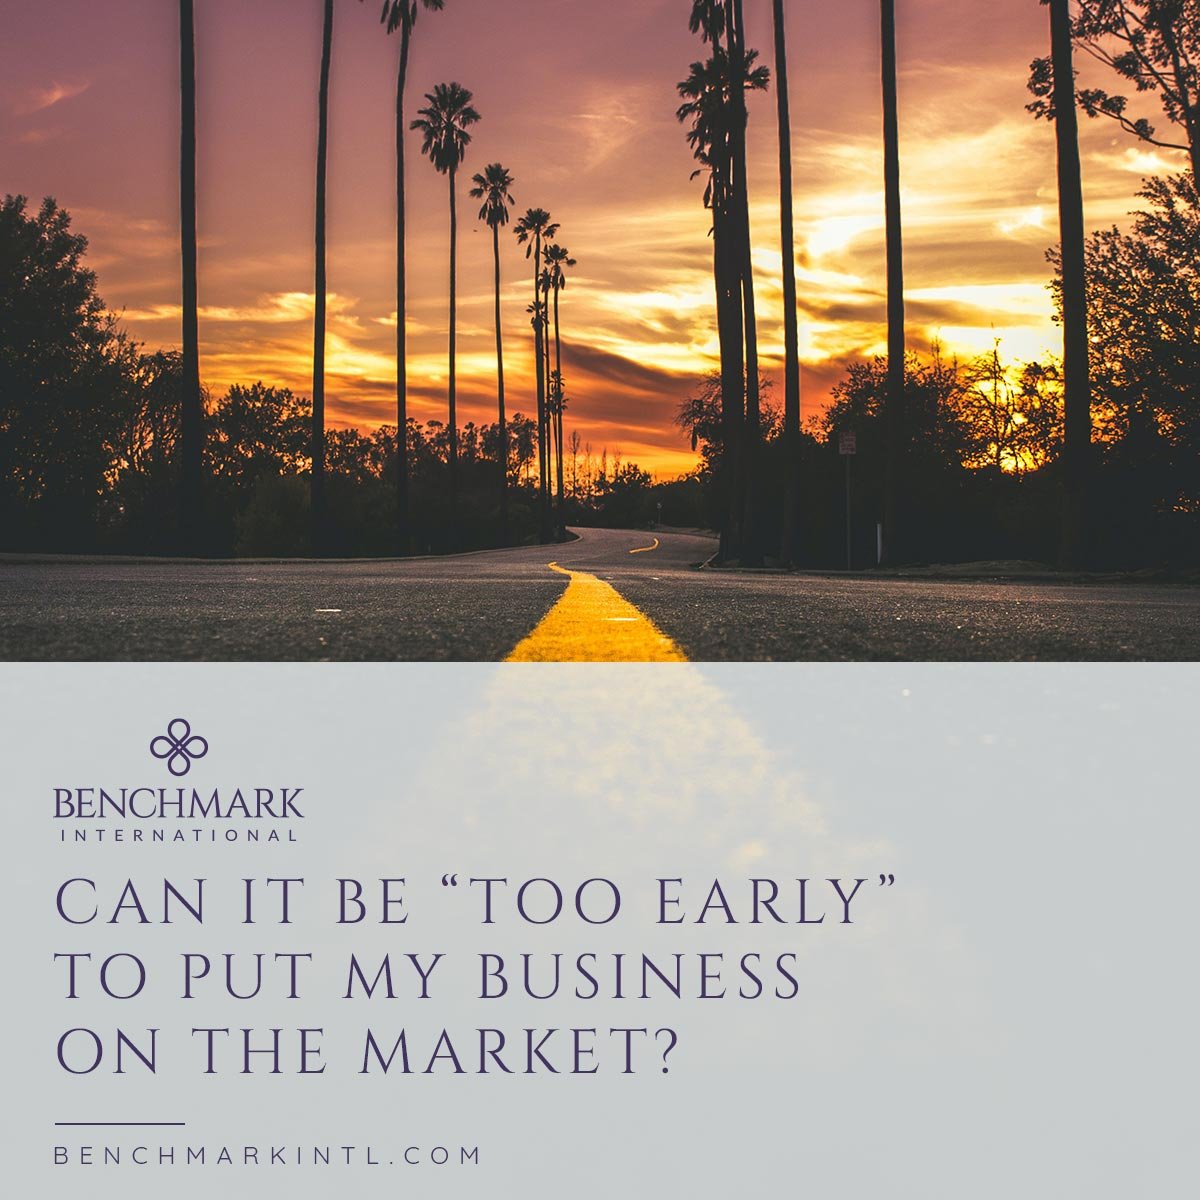 Can_It_Be_Too_Early_To_Put_My_Business_On_The_Market_Social